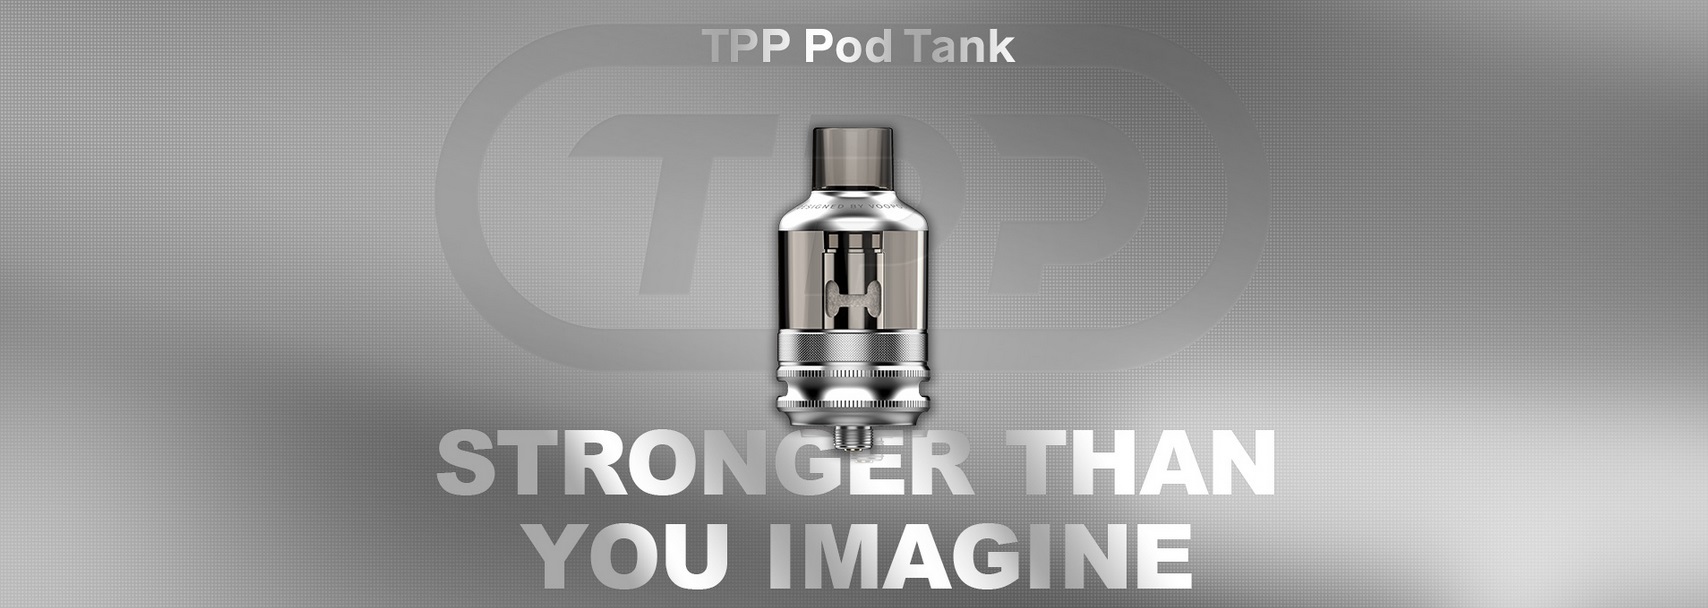 clearomizer-voopoo-tpp-pod-tank